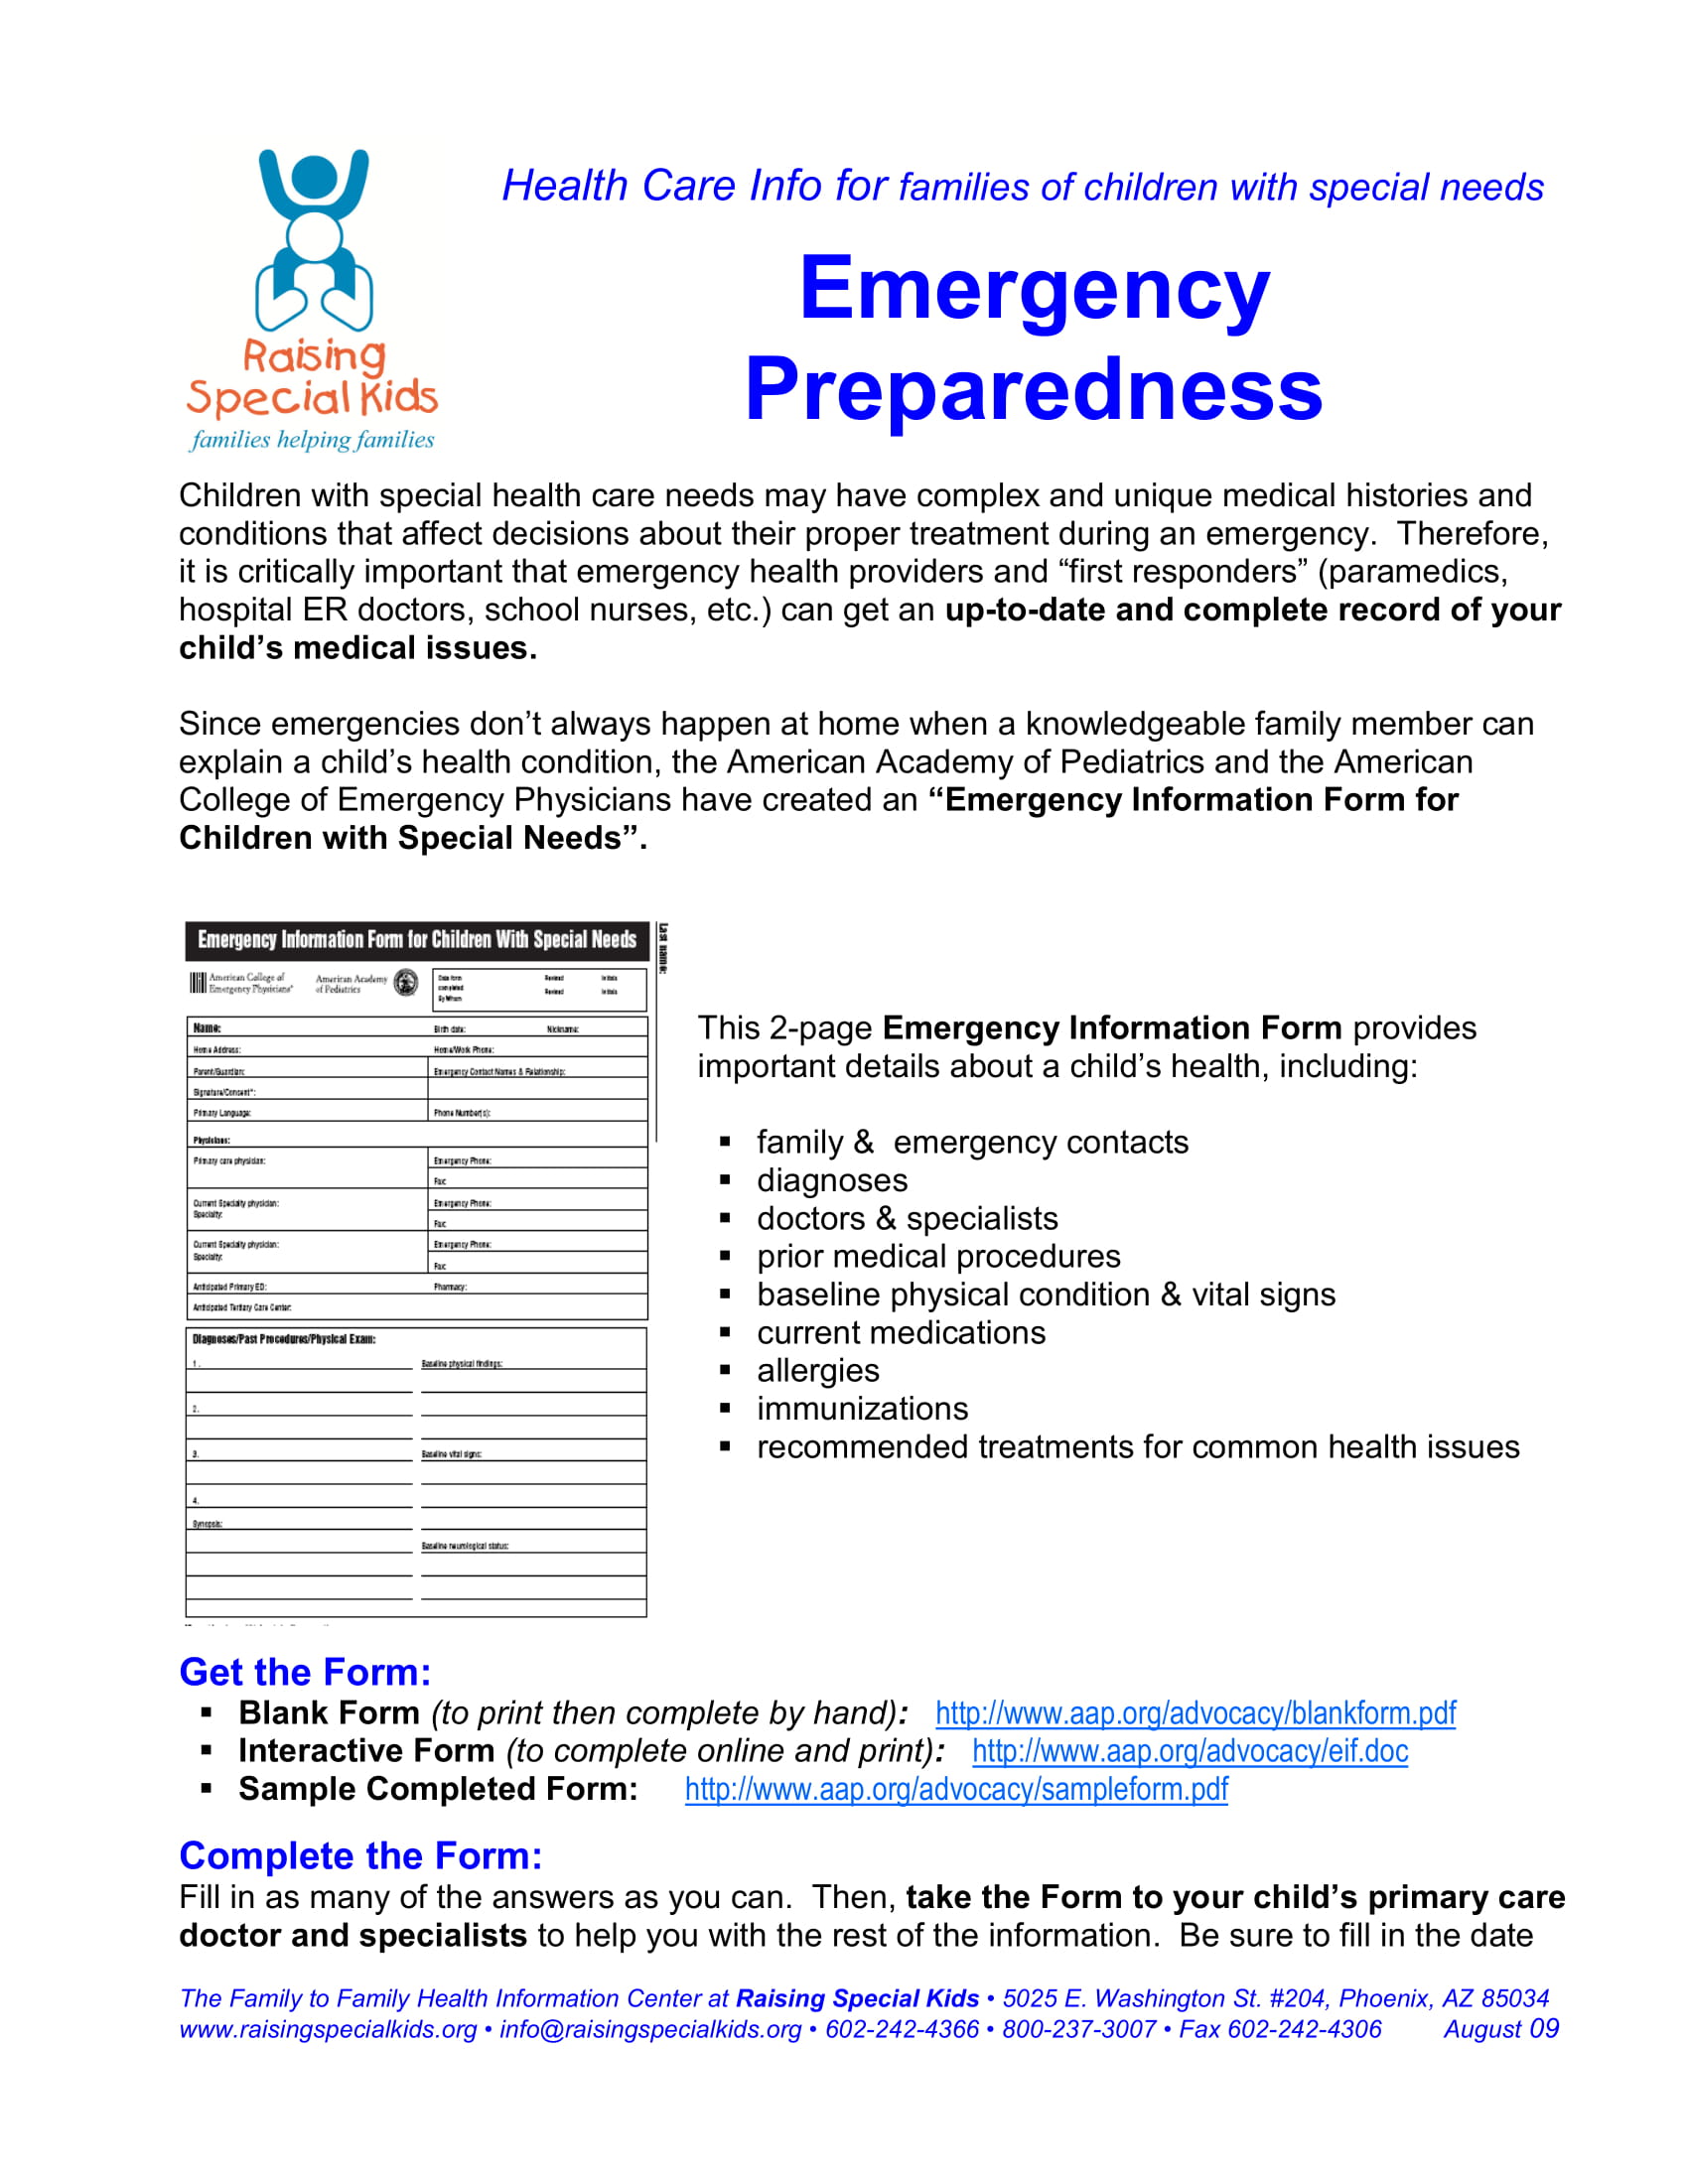 emergency information form for children with special needs